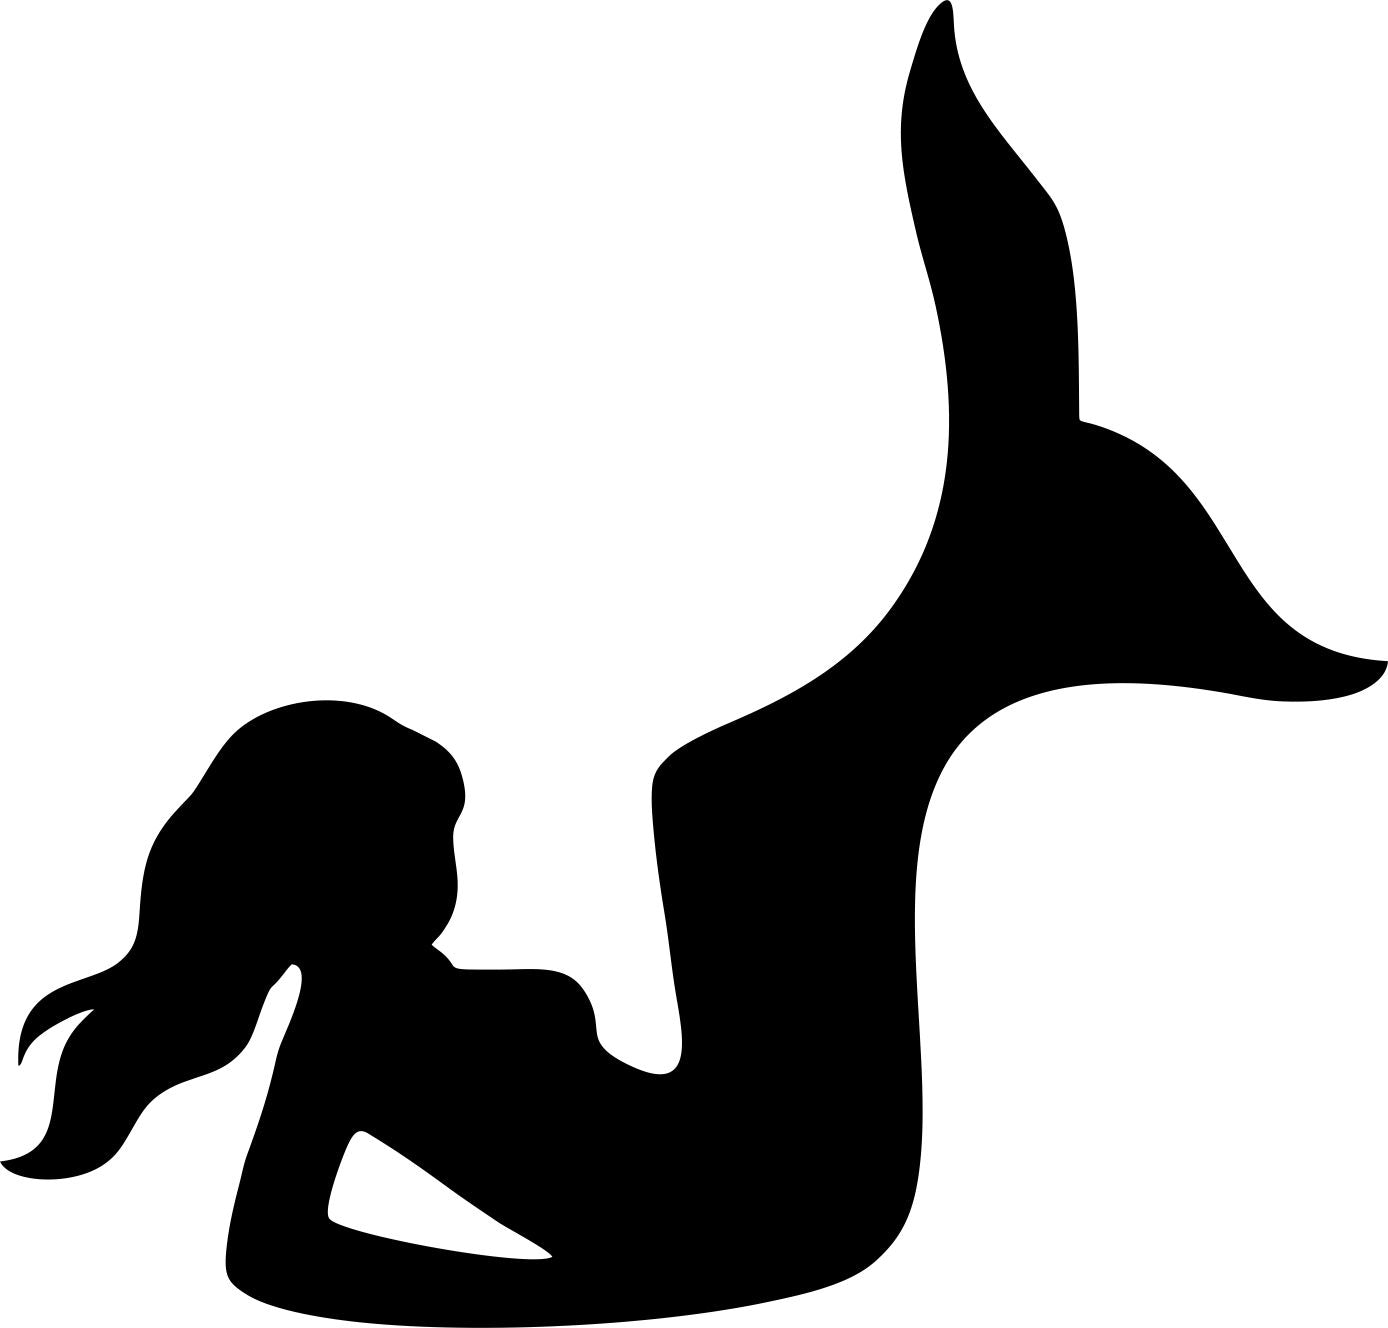 Mermaid Silhouette2 Vinyl Sticker Tattoo For Living Room,Wall Tattoo,Wall Stickers,Art Decal Decor Poster Decoration Mural,Window Wall